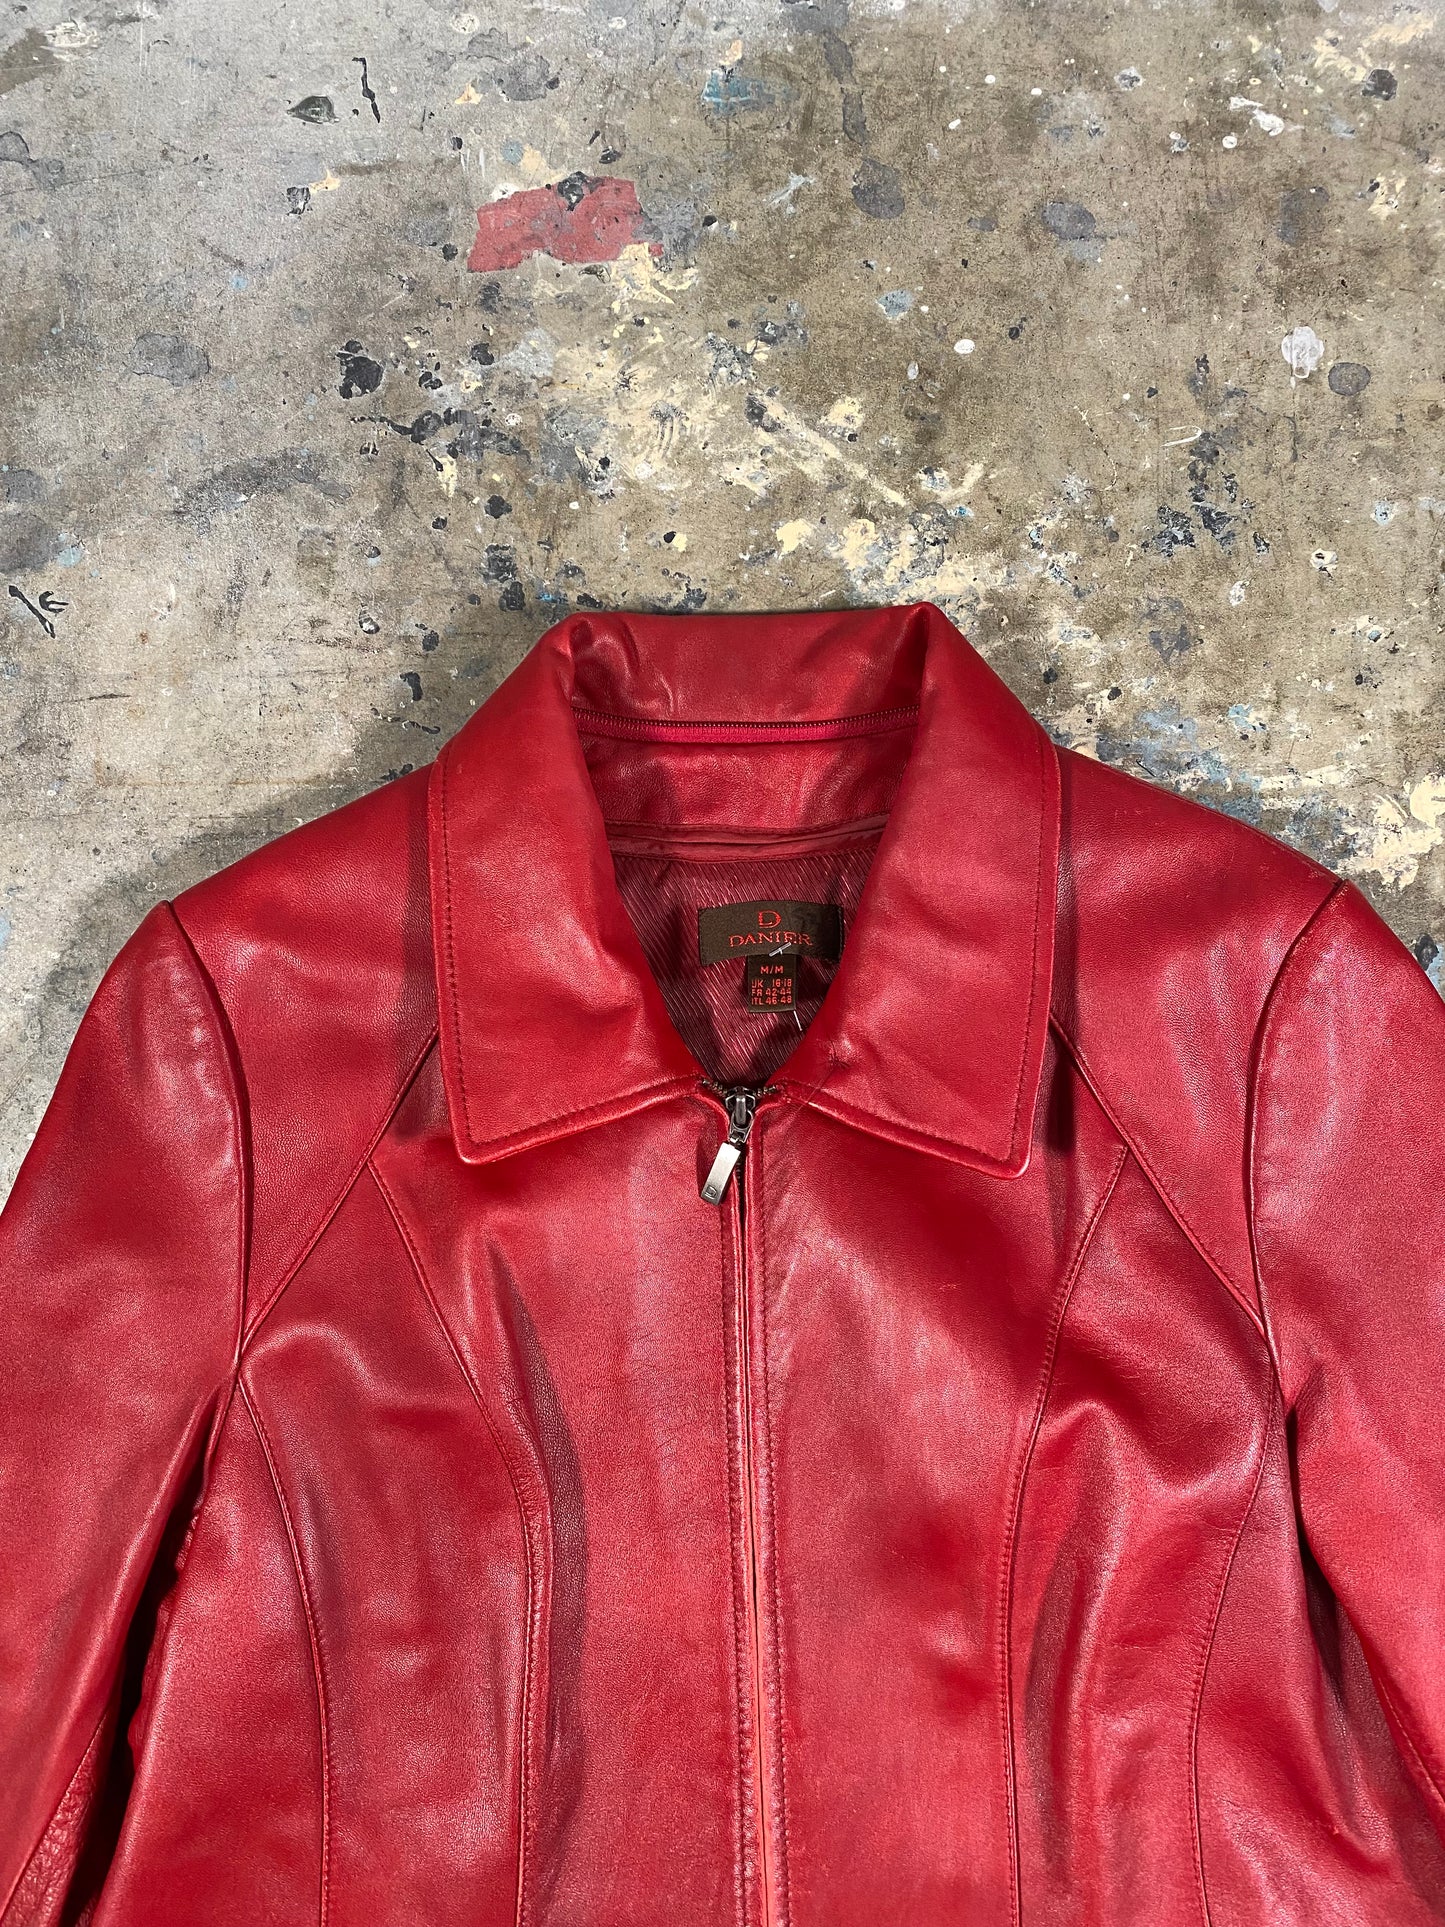 Danier Red Leather Jacket (M)